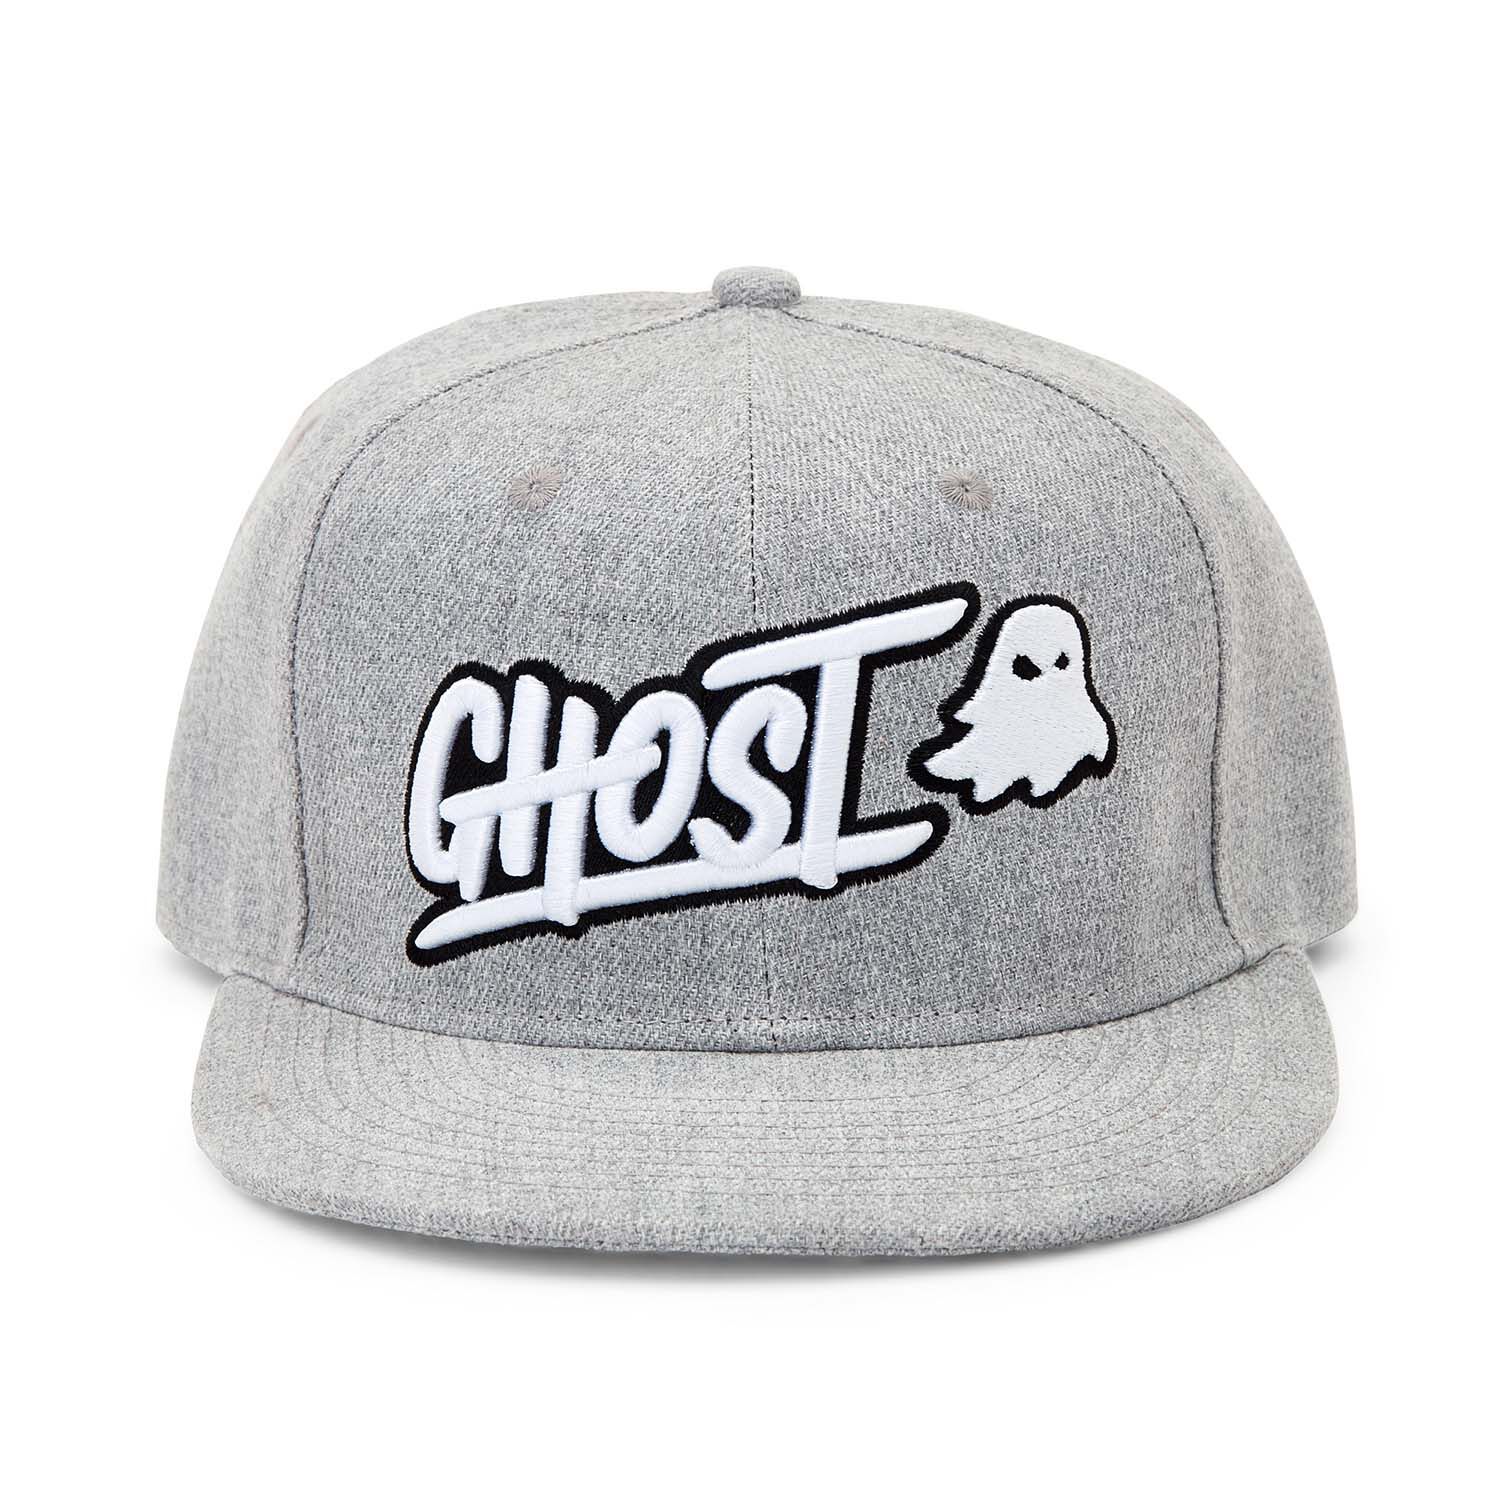 GHOST Snapback Hat with Logo - Gray